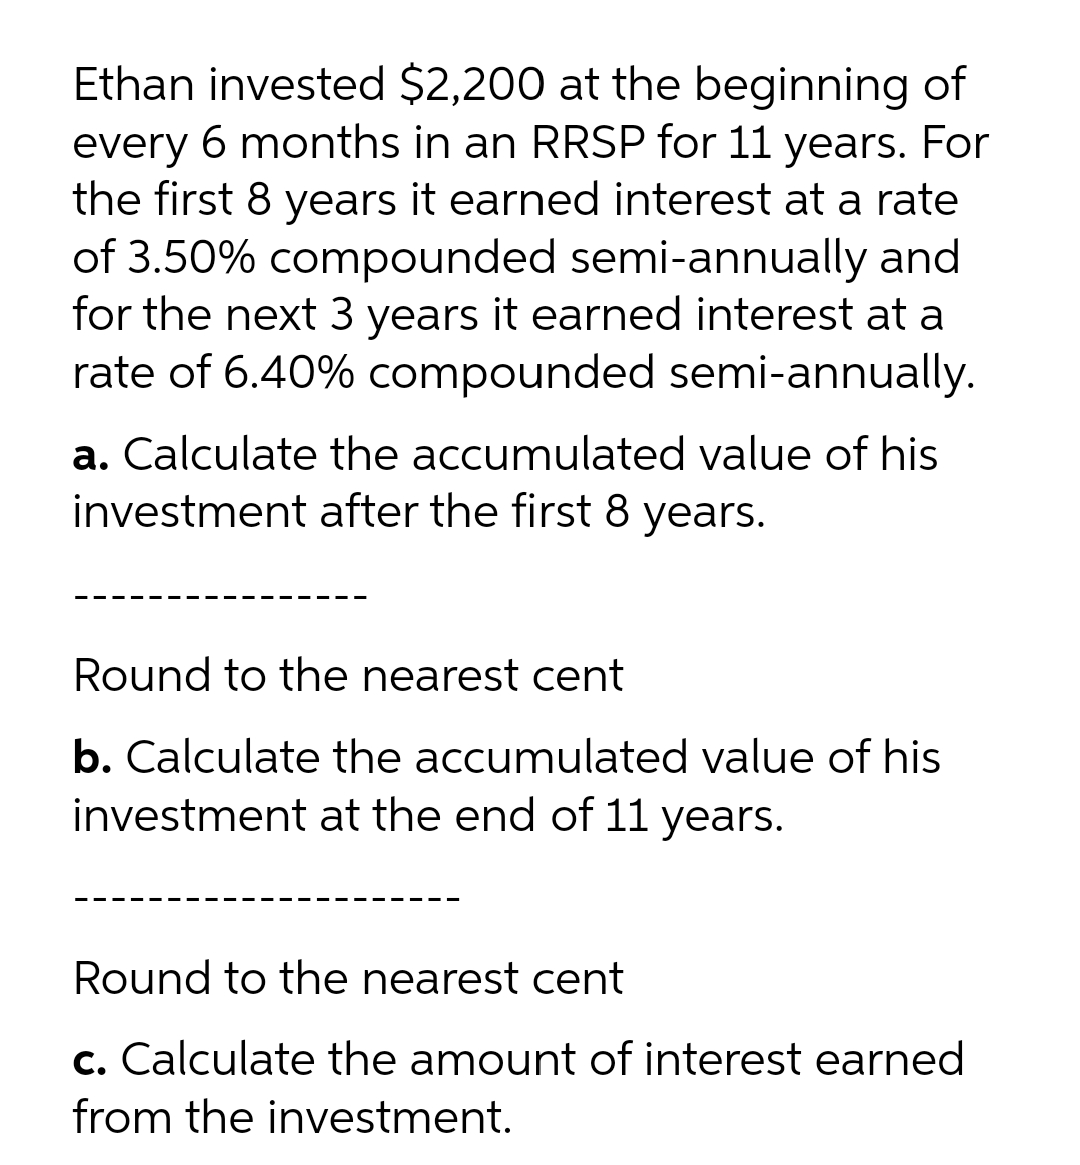 Ethan invested $2,200 at the beginning of
every 6 months in an RRSP for 11 years. For
the first 8 years it earned interest at a rate
of 3.50% compounded semi-annually and
for the next 3 years it earned interest at a
rate of 6.40% compounded semi-annually.
a. Calculate the accumulated value of his
investment after the first 8 years.
Round to the nearest cent
b. Calculate the accumulated value of his
investment at the end of 11 years.
Round to the nearest cent
c. Calculate the amount of interest earned
from the investment.
